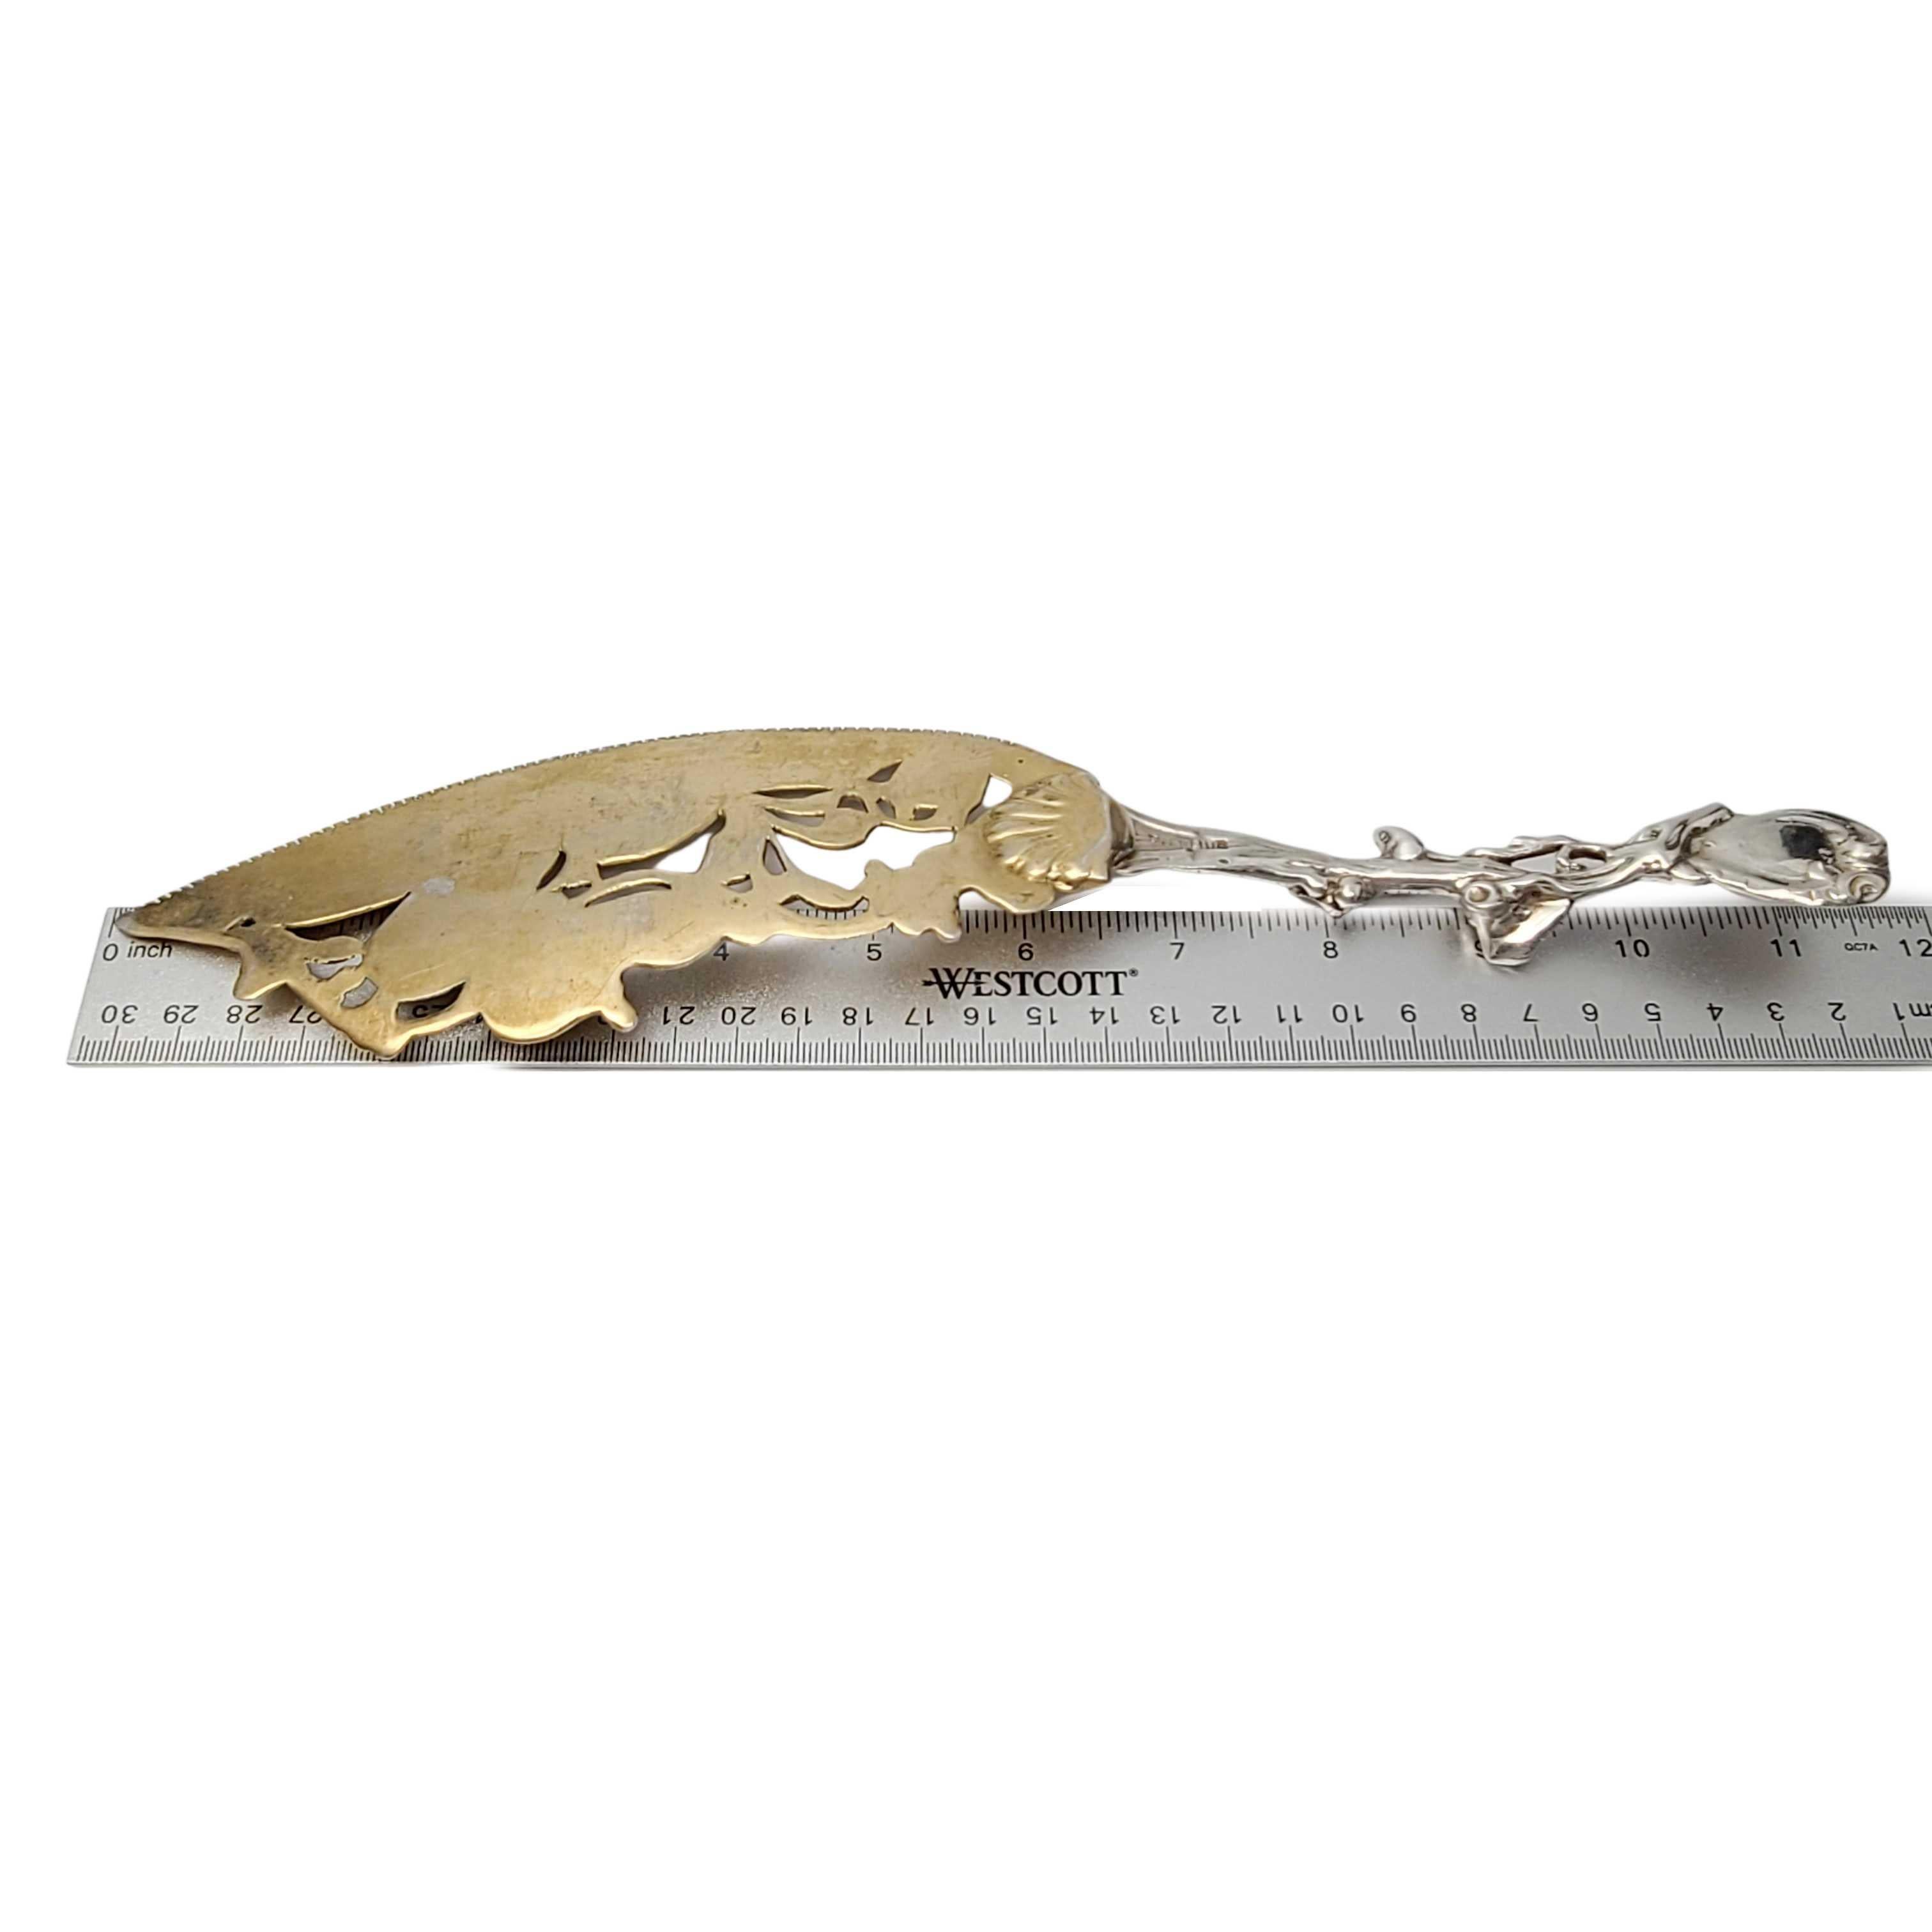 Antique Art Nouveau Sterling Silver Fish Server with Gold Wash Blade For Sale 4